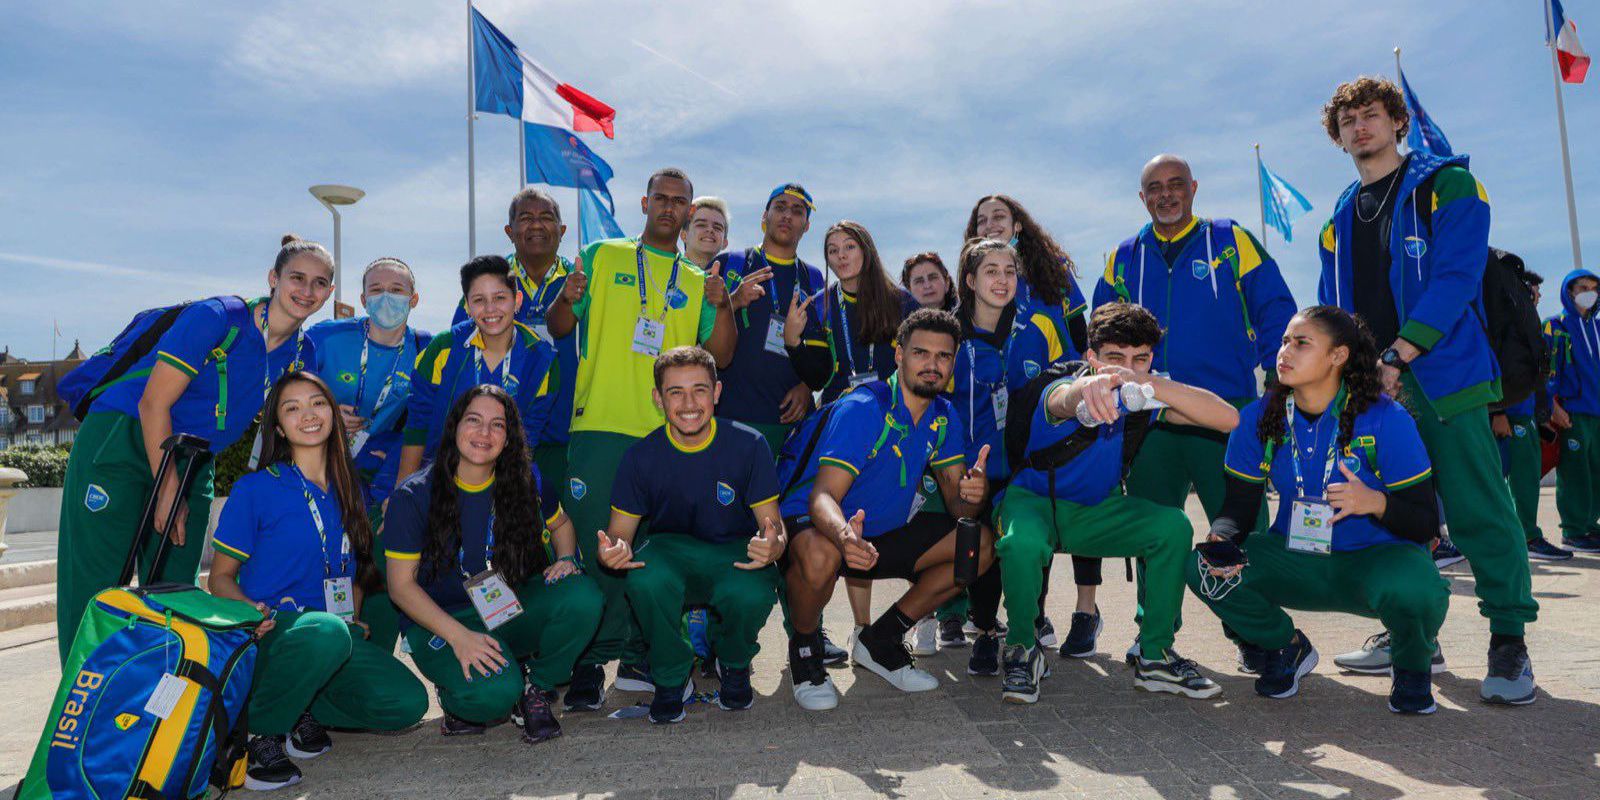 Brazil ranks 2nd overall in student Olympic medals